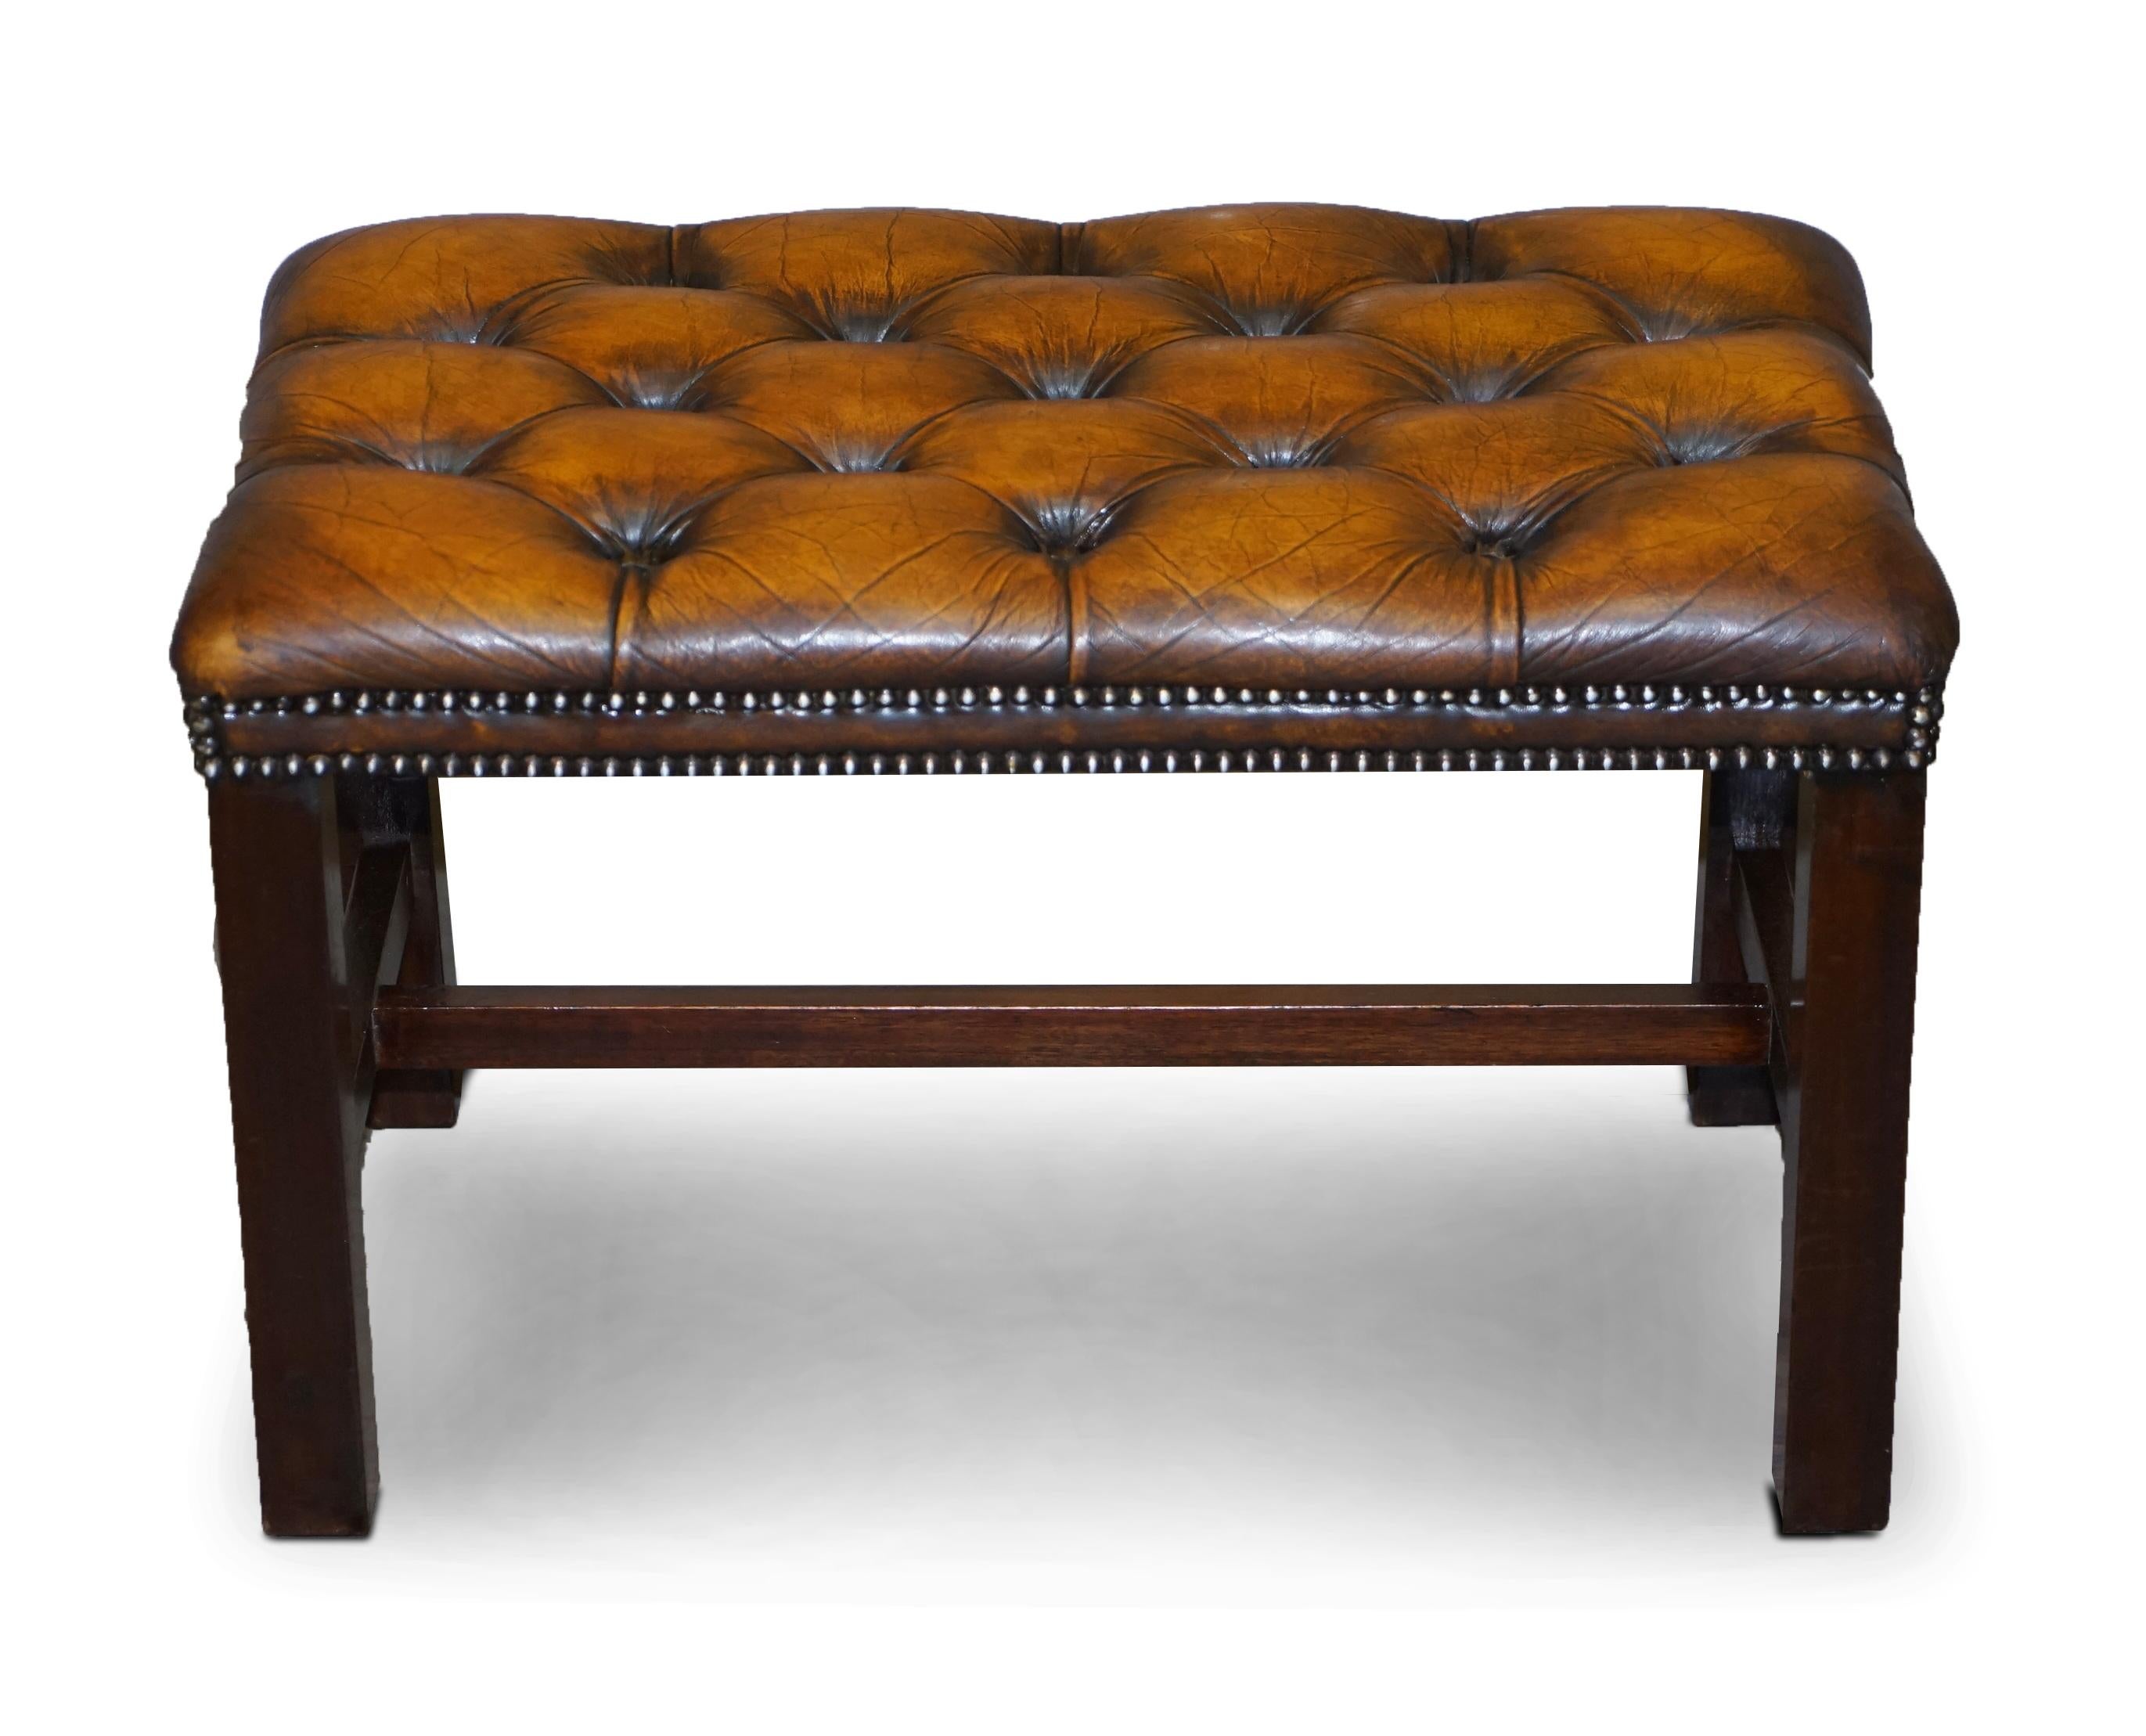 This sale is for a stunning late 20th century, fully restored Chesterfield Piano stool or single bench seat in cigar brown leather

A very good looking stool, its larger than a footstool so designed for Pianos, dressing tables and so on

The